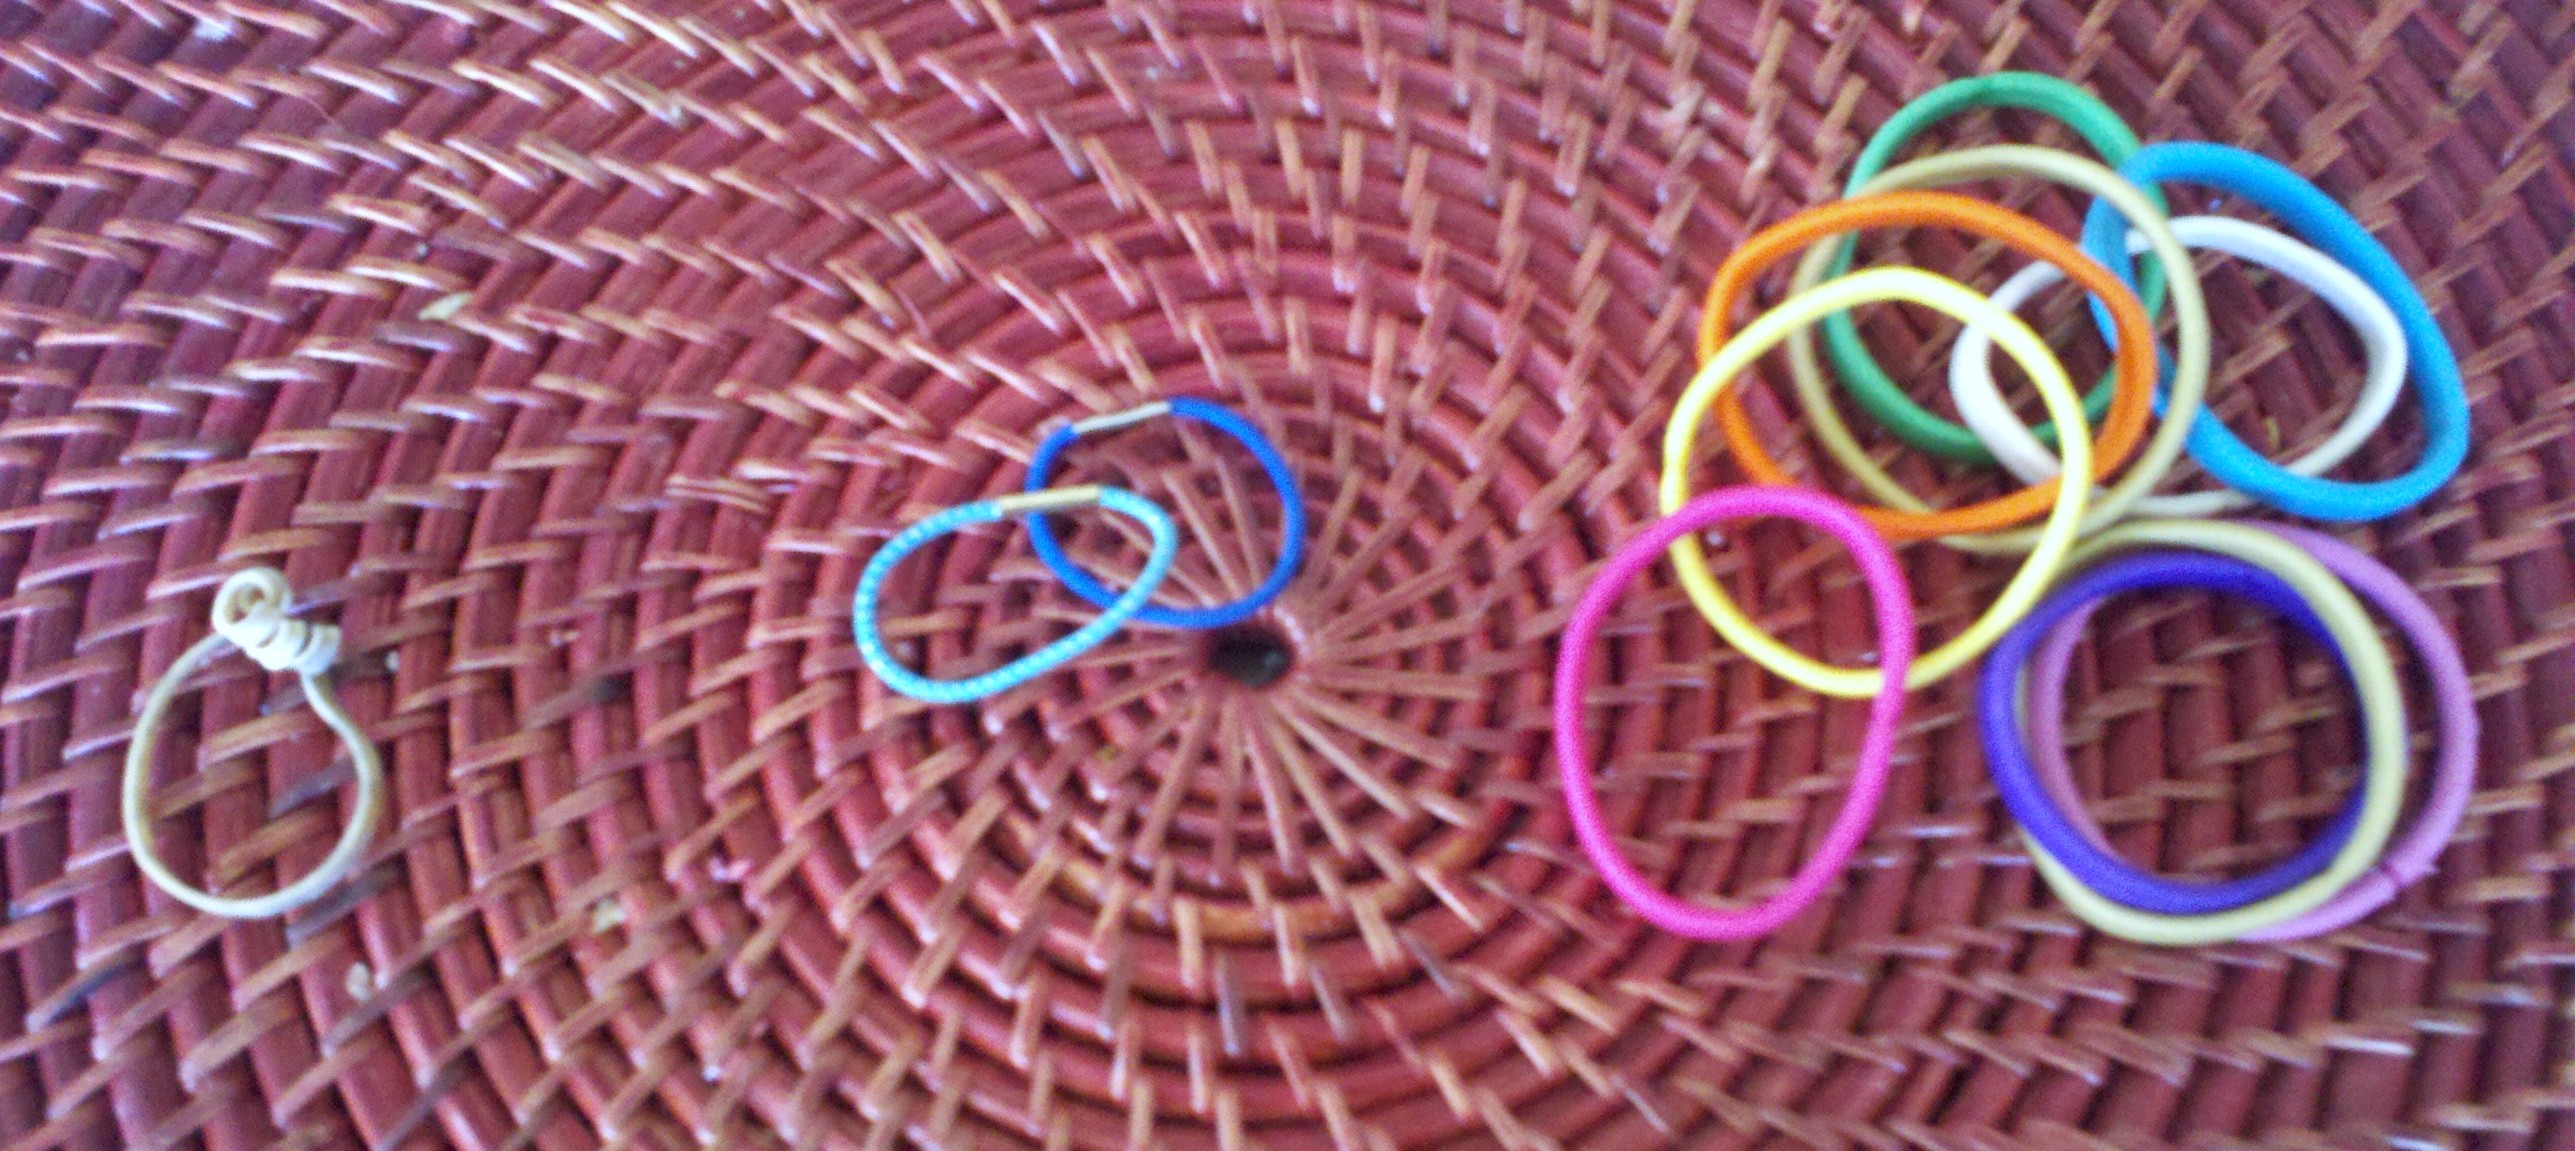 rubber band can